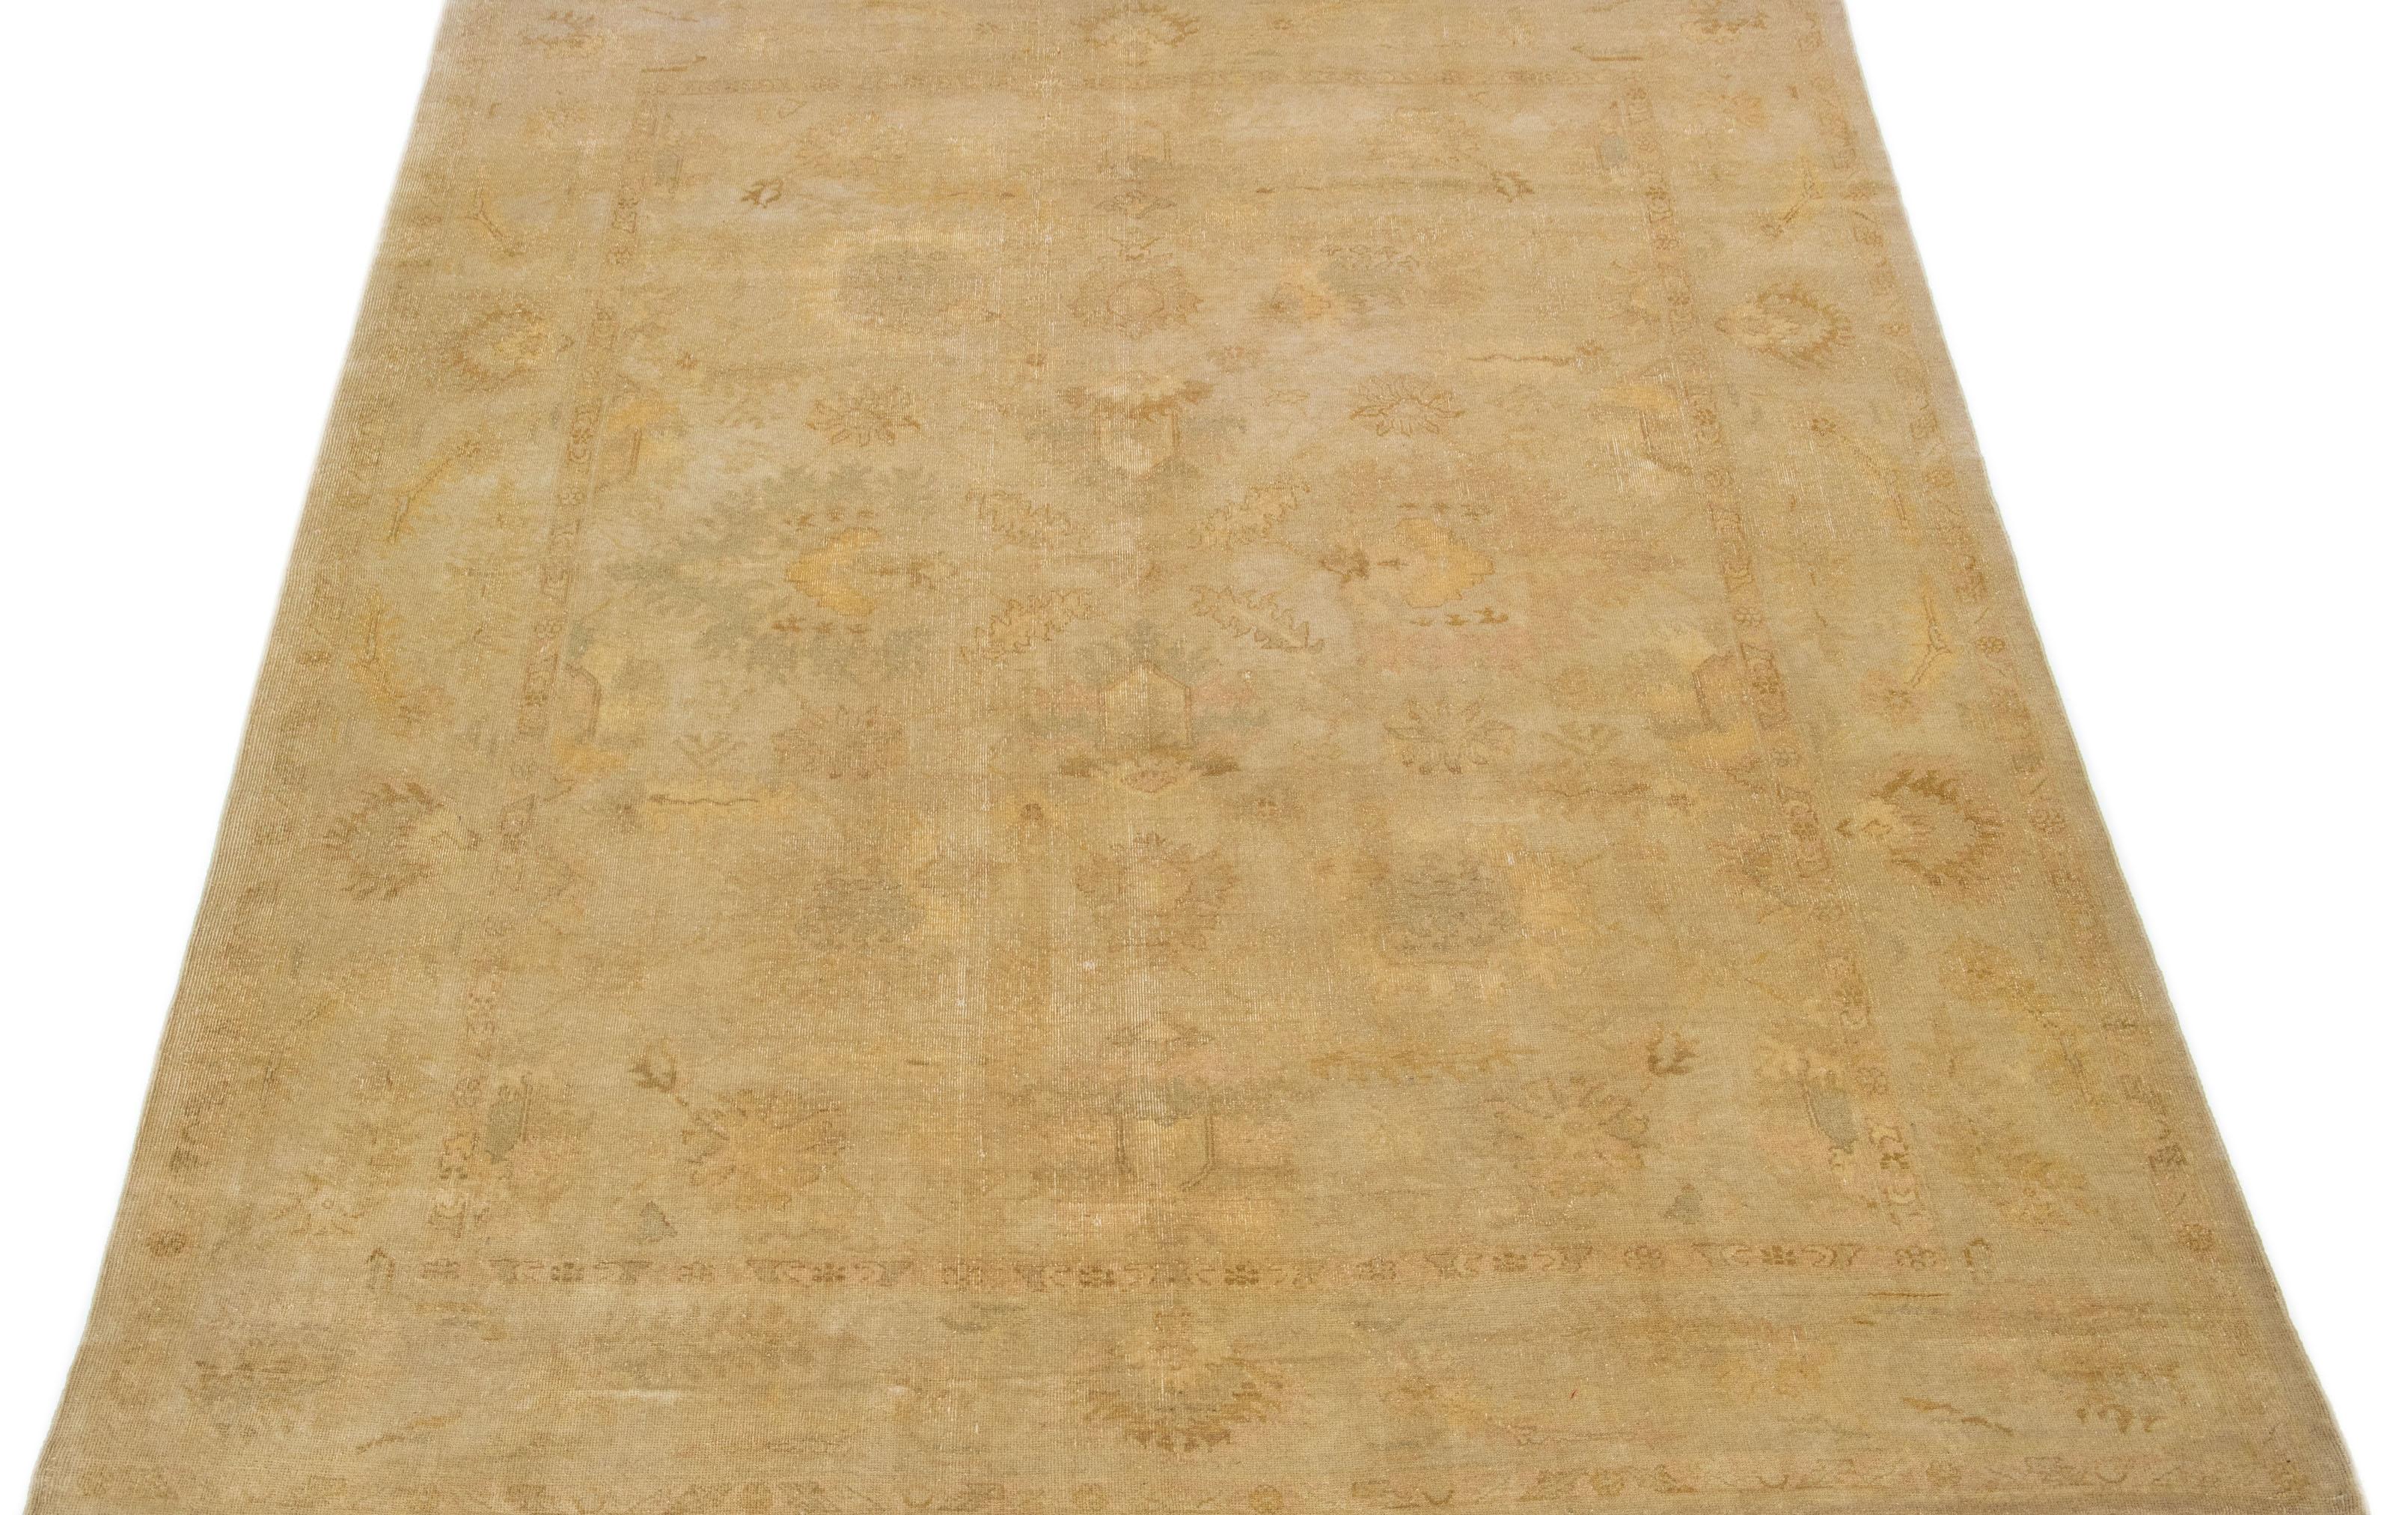 This hand knotted wool rug boasts a stunning Vintage Oushak design, featuring an elegant beige field complemented by Classic floral patterns in shades of brown and tan. 

This rug measures 8'10